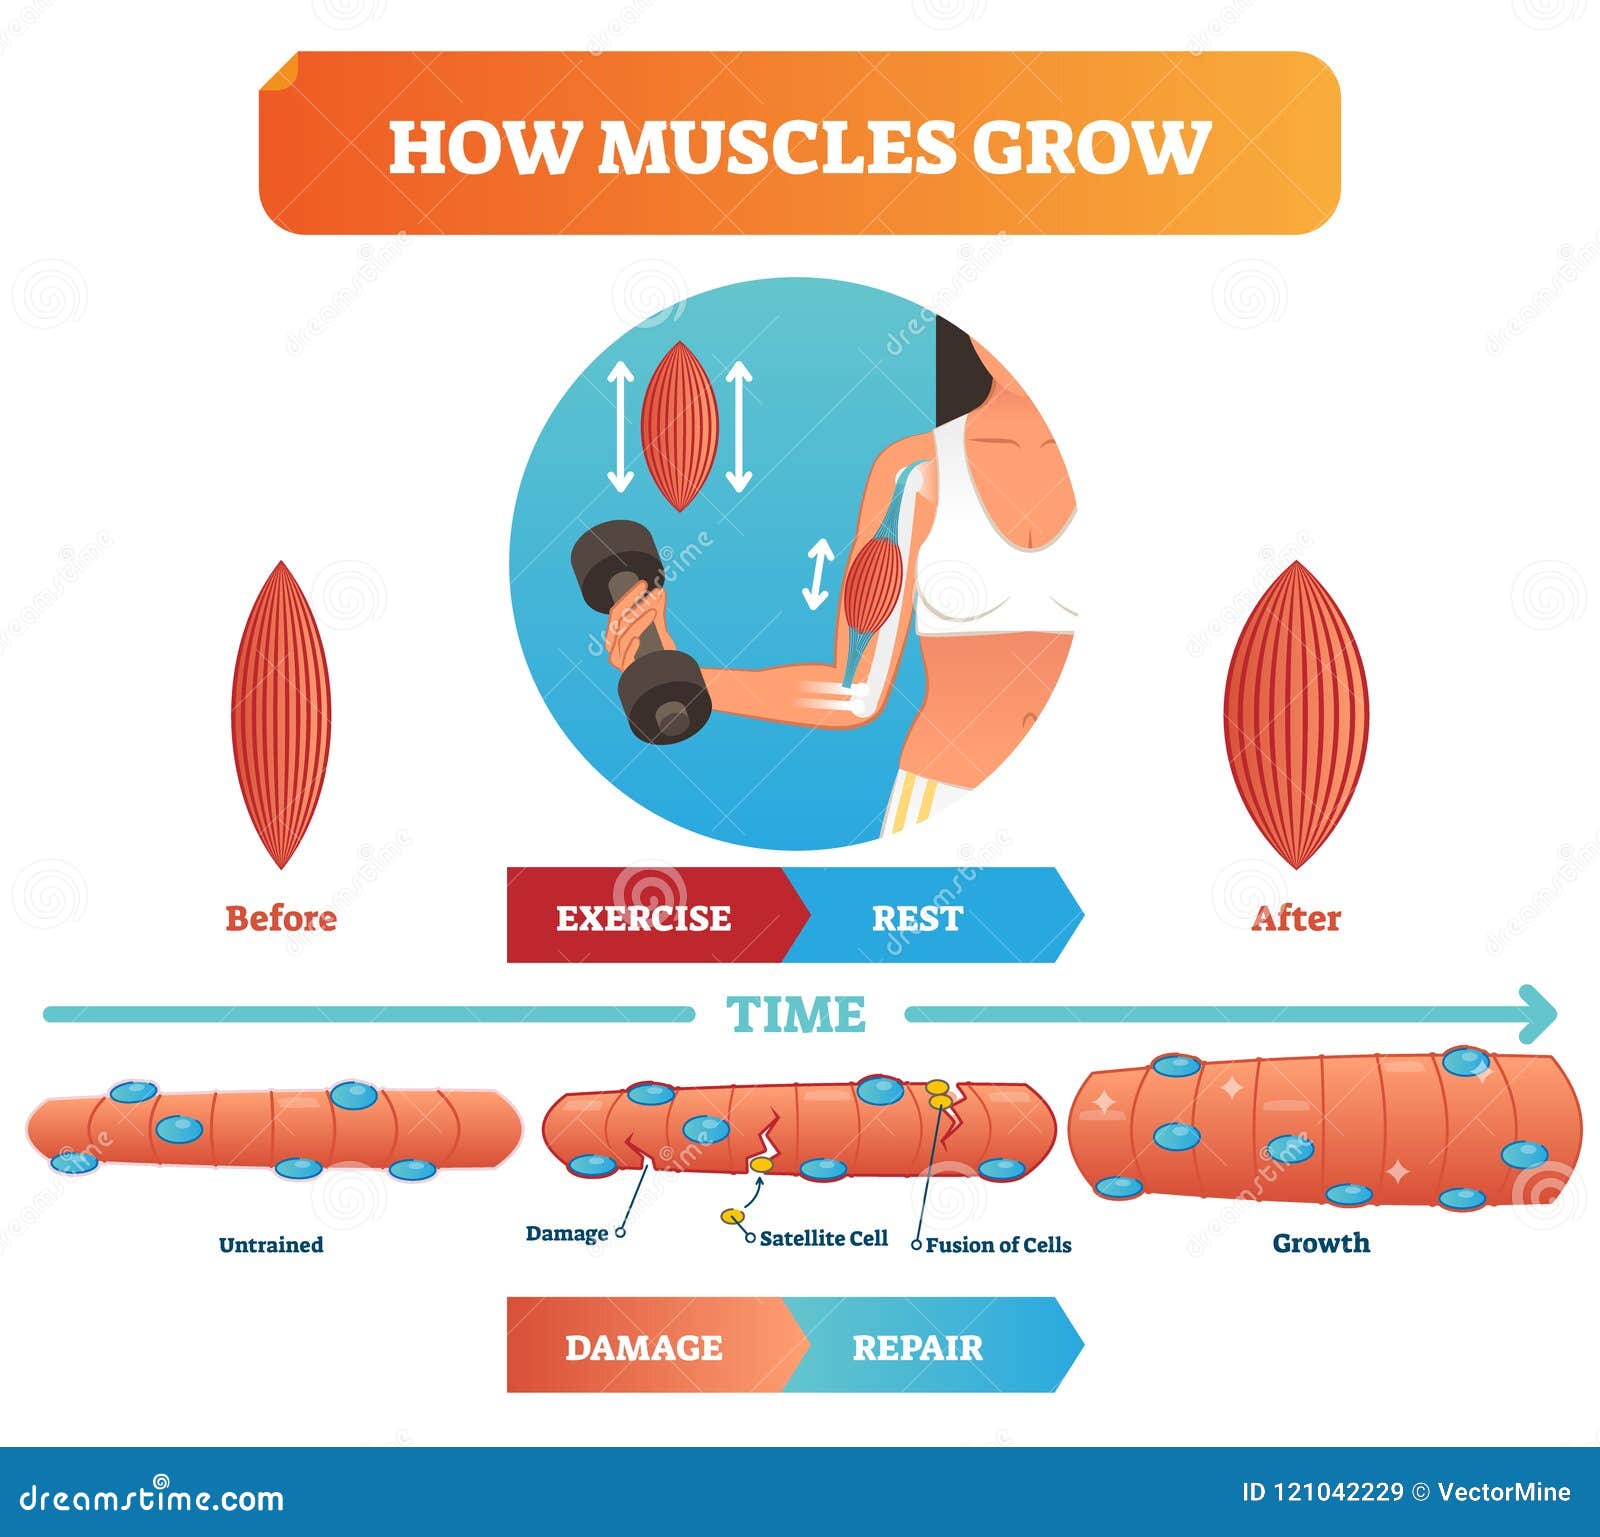   about how muscles grow. medical educational diagram and scheme with satellite cell and fusion of cells.